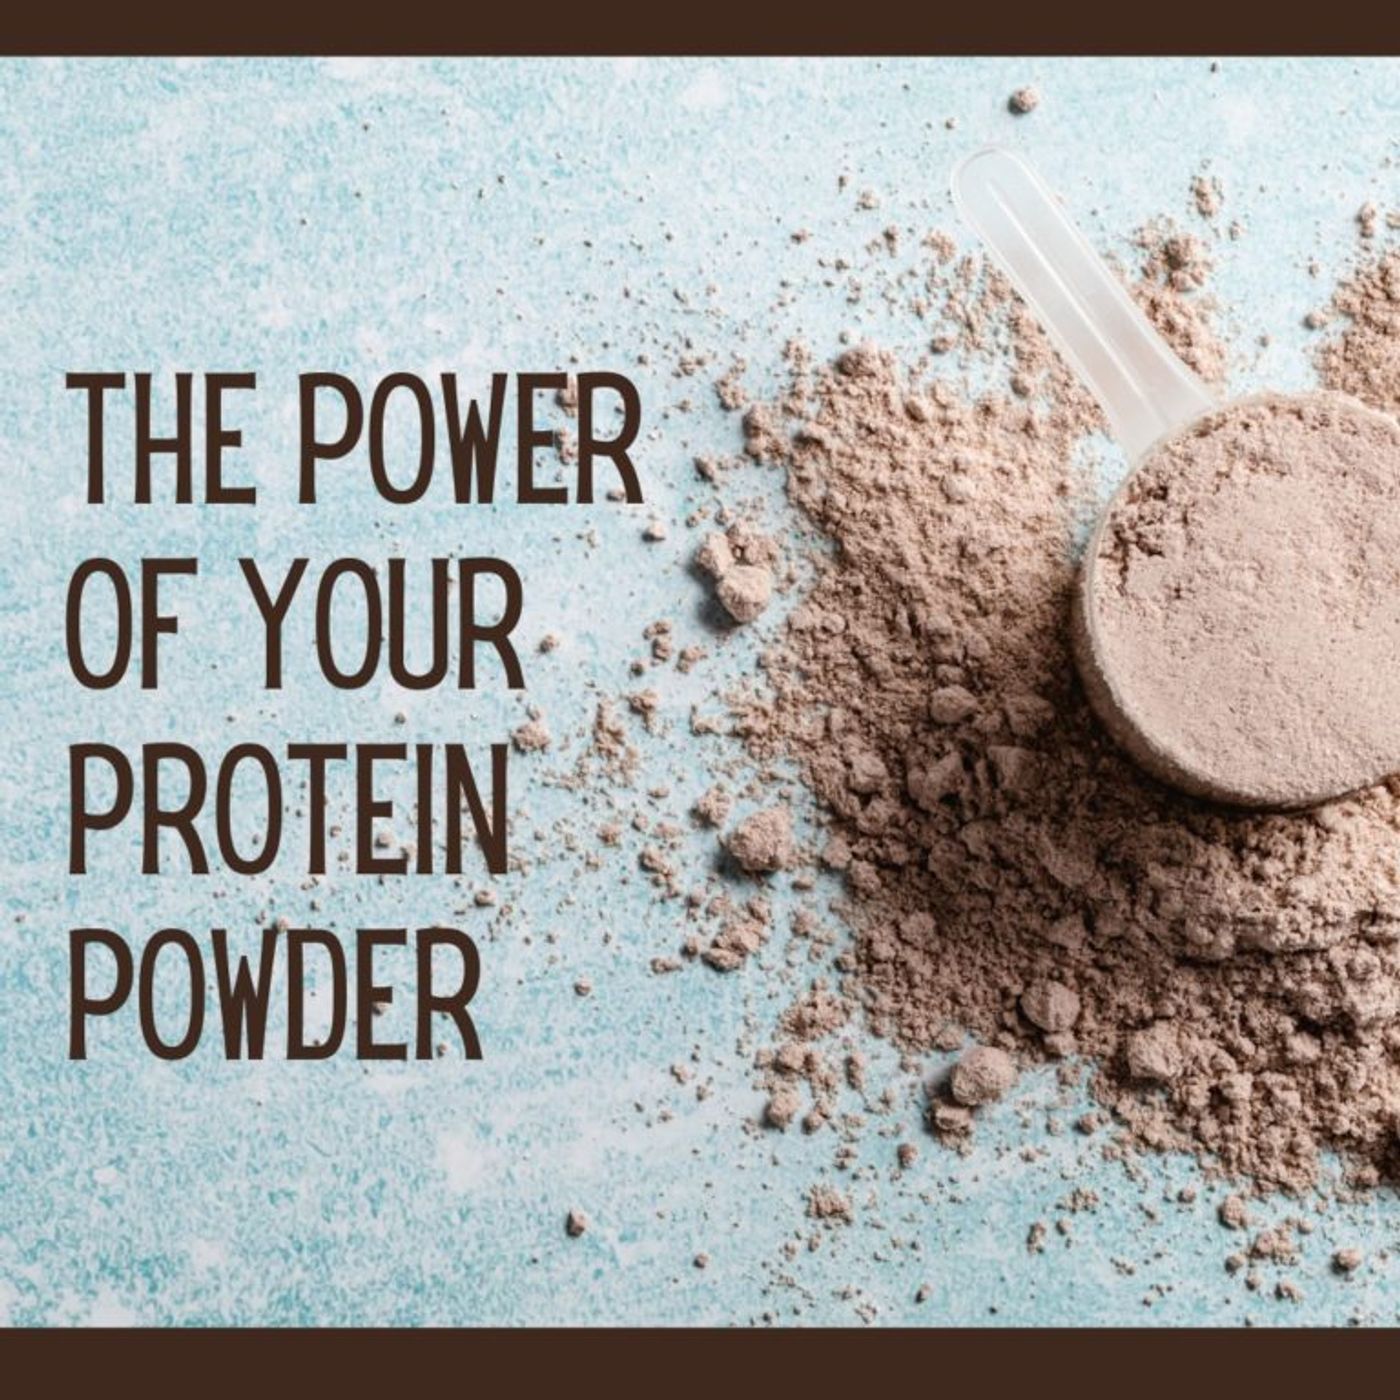 The Power of Your Protein Powder